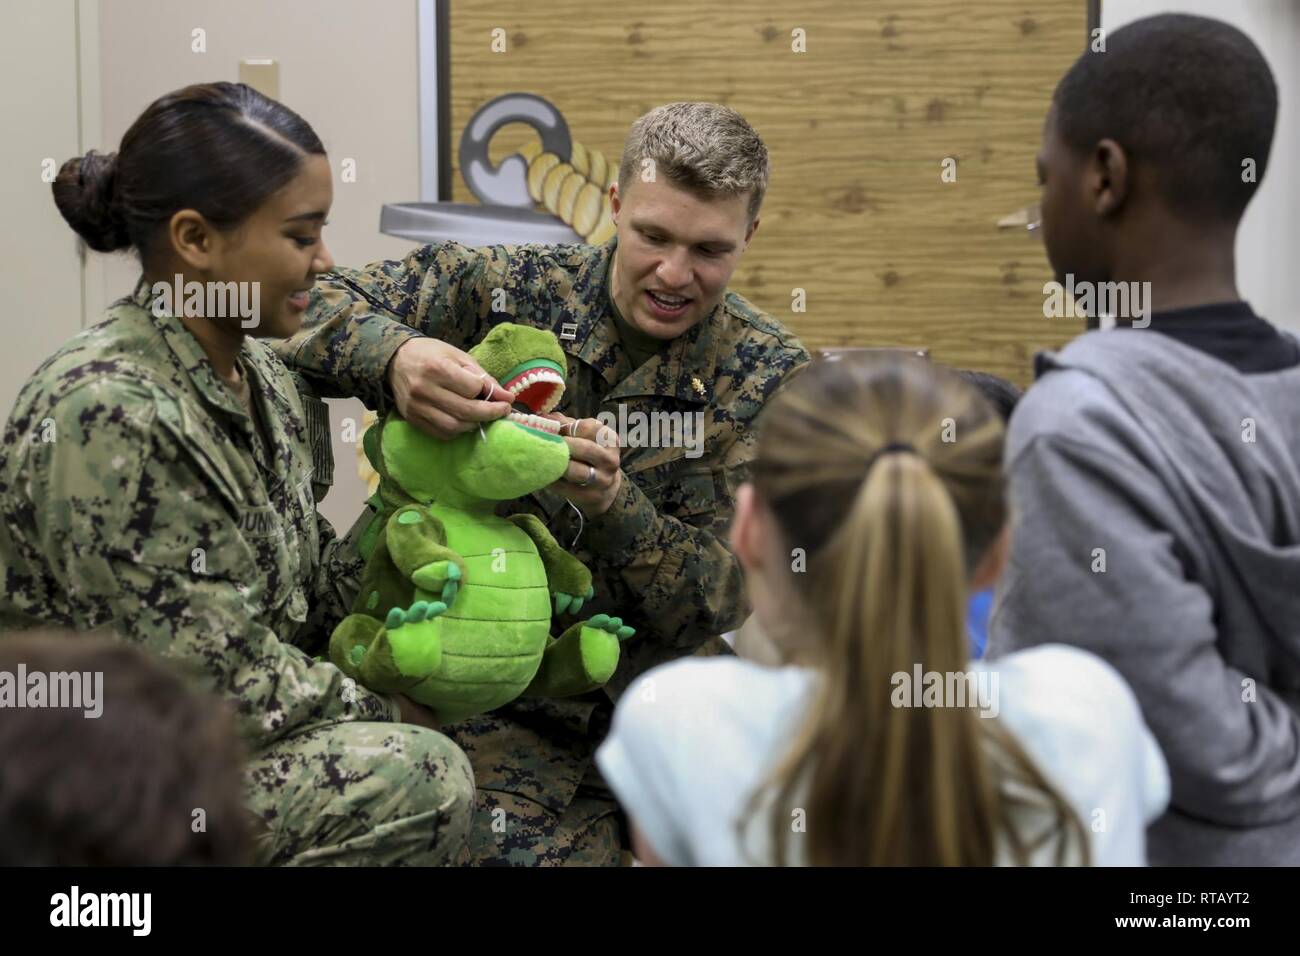 Navy Lt. Michael J. Lawrence, center left, and Seaman Lauryn A. Dunning, left, demonstrate how to properly floss teeth to students from Kinser Elementary School Feb. 5, 2019 on Camp Kinser, Okinawa, Japan. Sailors from Naval clinics in Okinawa held a presentation to promote oral health awareness during National Children’s Dental Health Month. Lawrence, a general dentist with Branch Dental Clinic Evans, 3rd Dental Battalion, 3rd Marine Logistics Group, is a native of Troutdale, Oregon. Dunning, a hospital corpsman with Branch Dental Clinic Futenma, 3rd Dental Bn., 3rd MLG, is native of New Orle Stock Photo